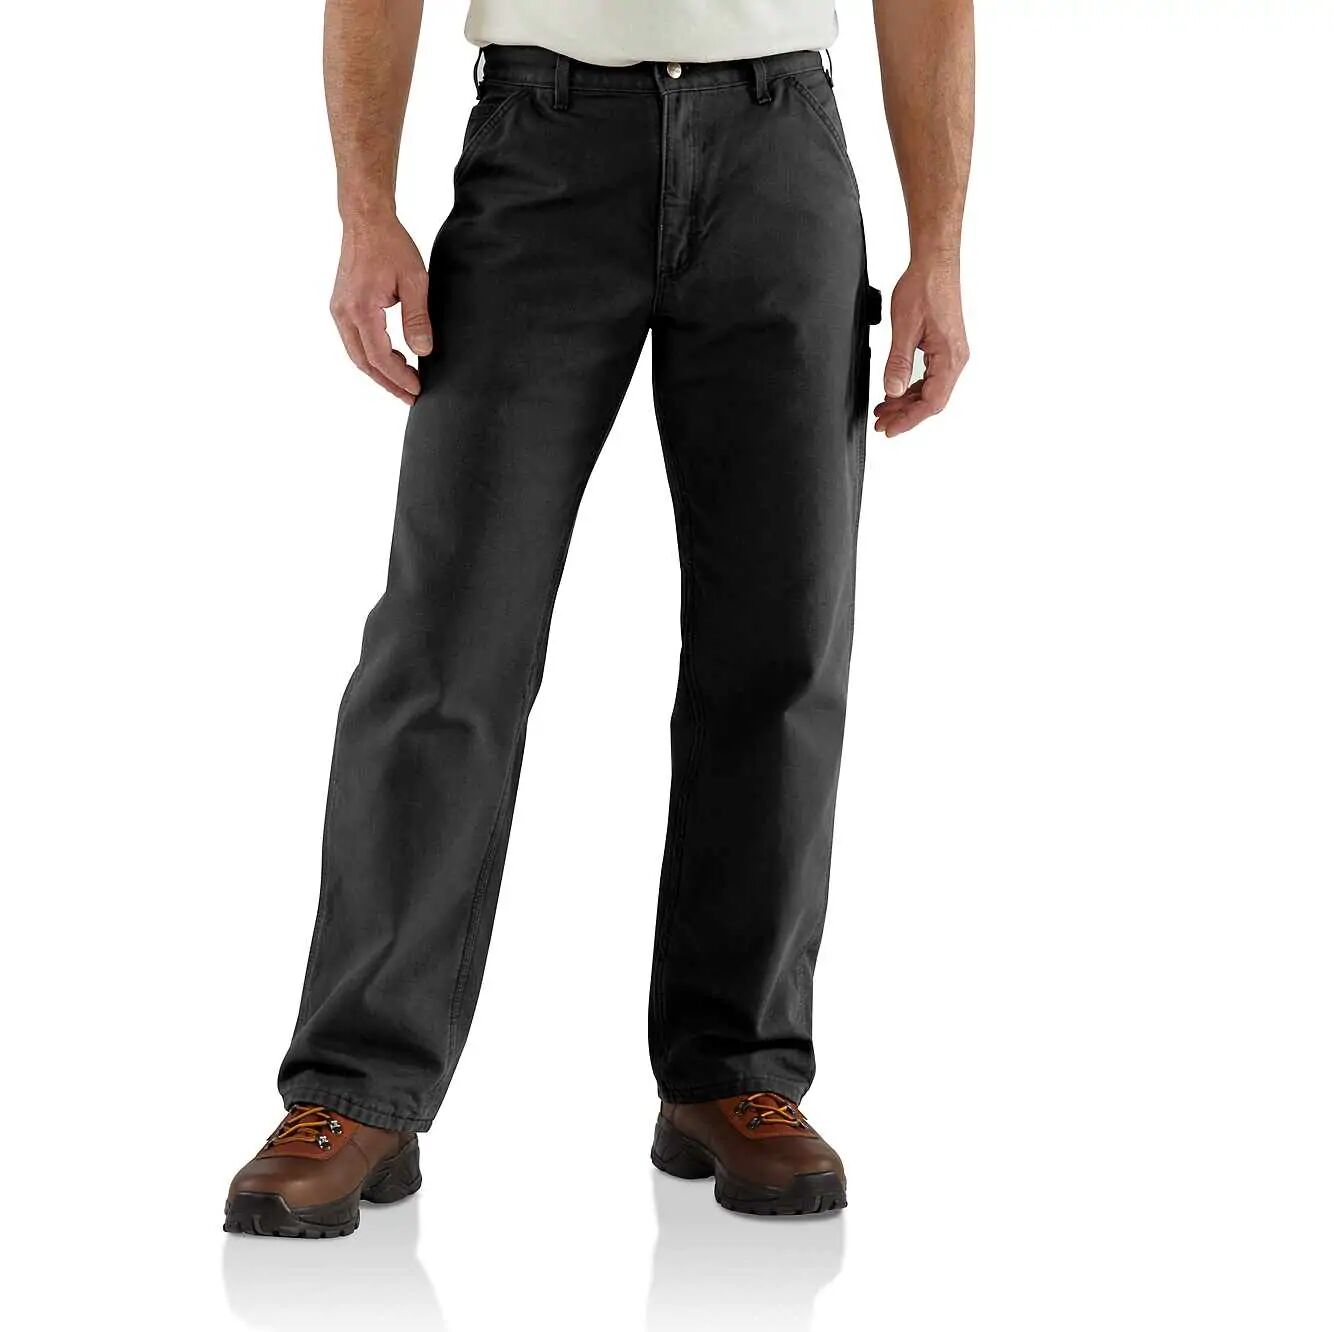 Men's Flannel Lined Washed Duck Dungaree Pant - Pants